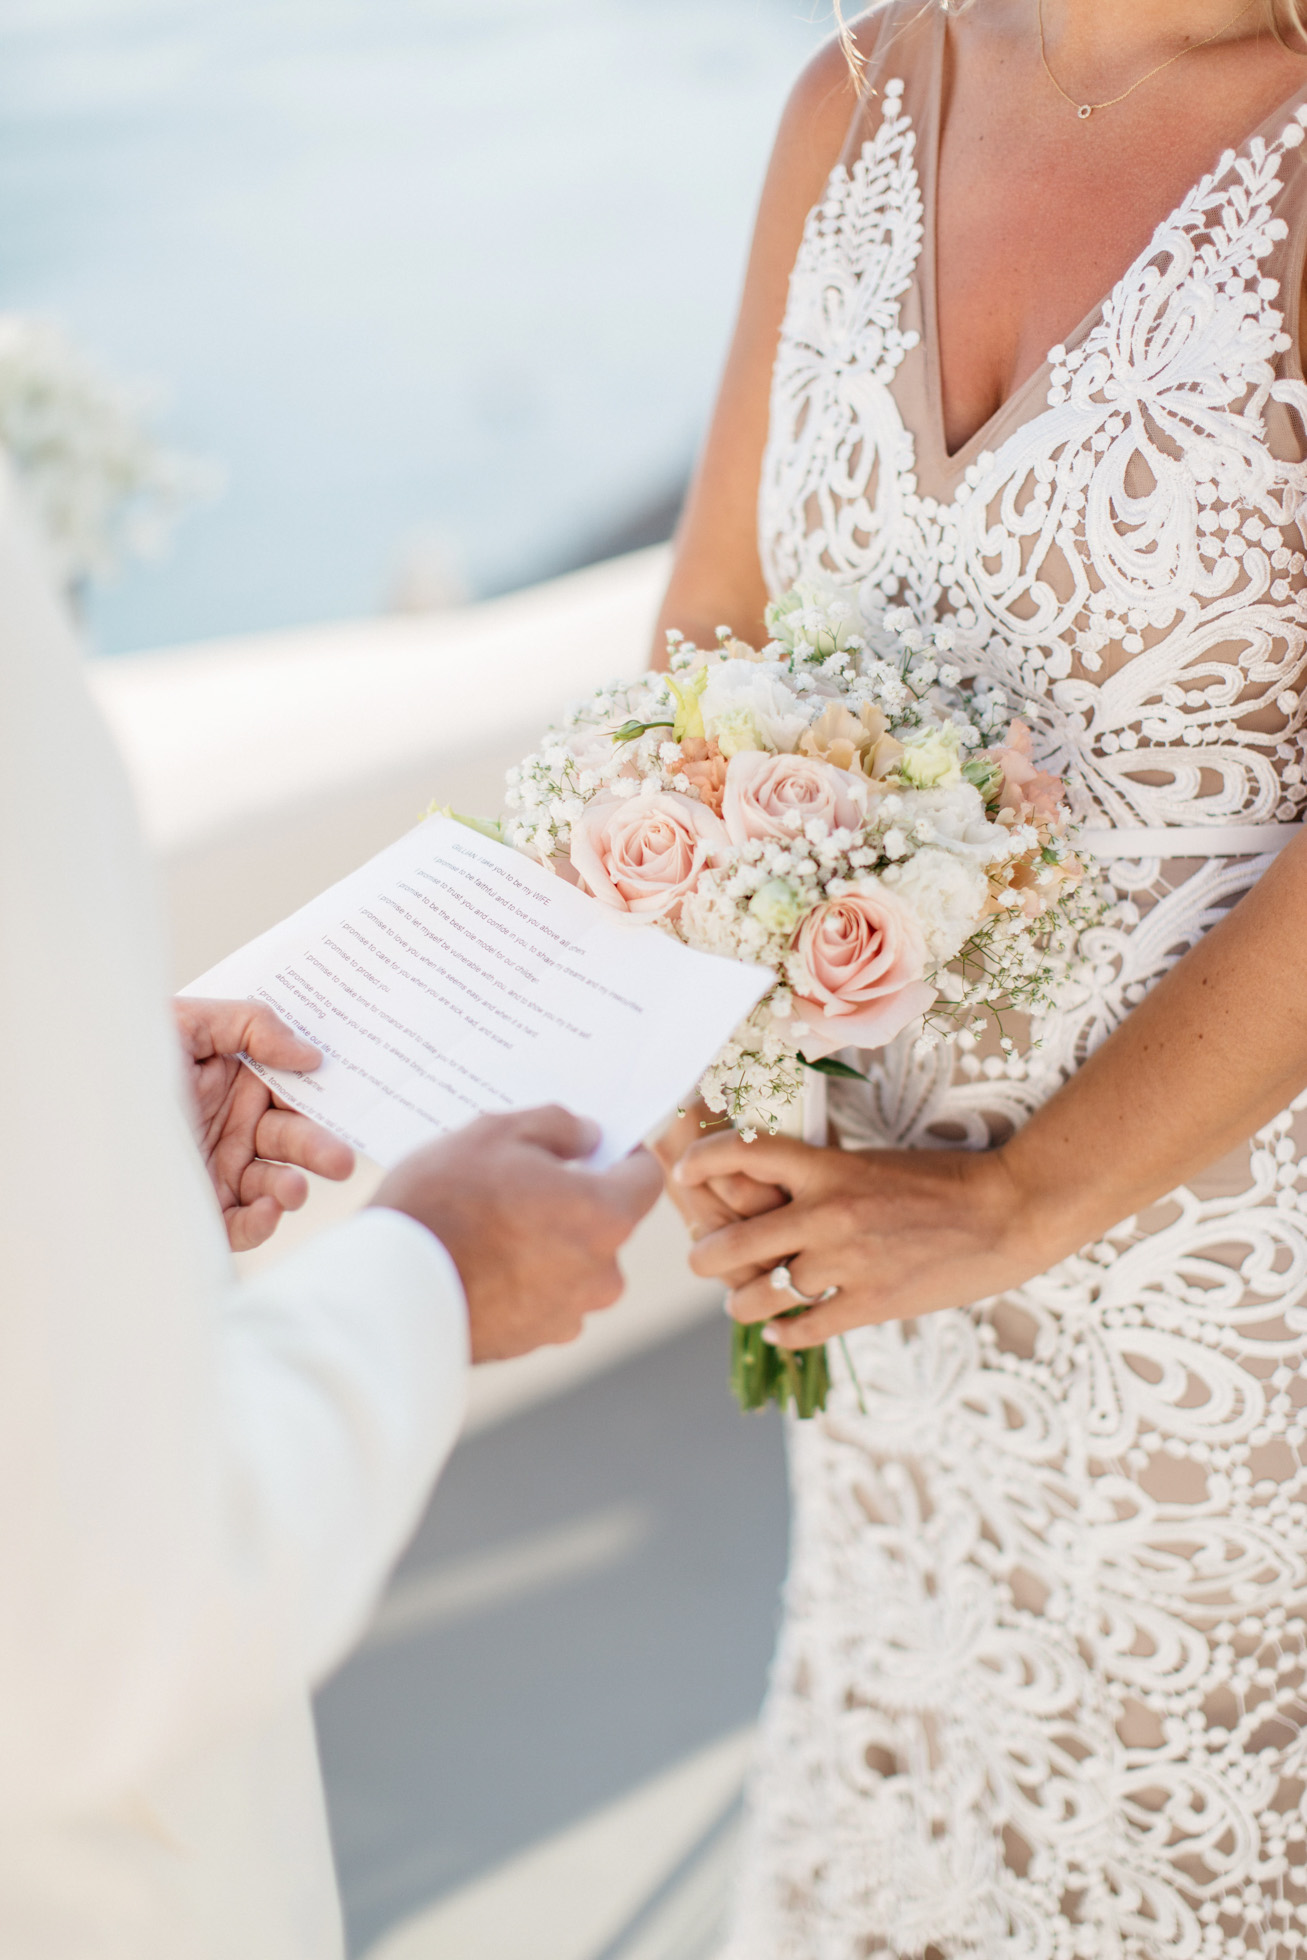 Wedding vows during ceremony in Canaves Suites Oia Santorini.